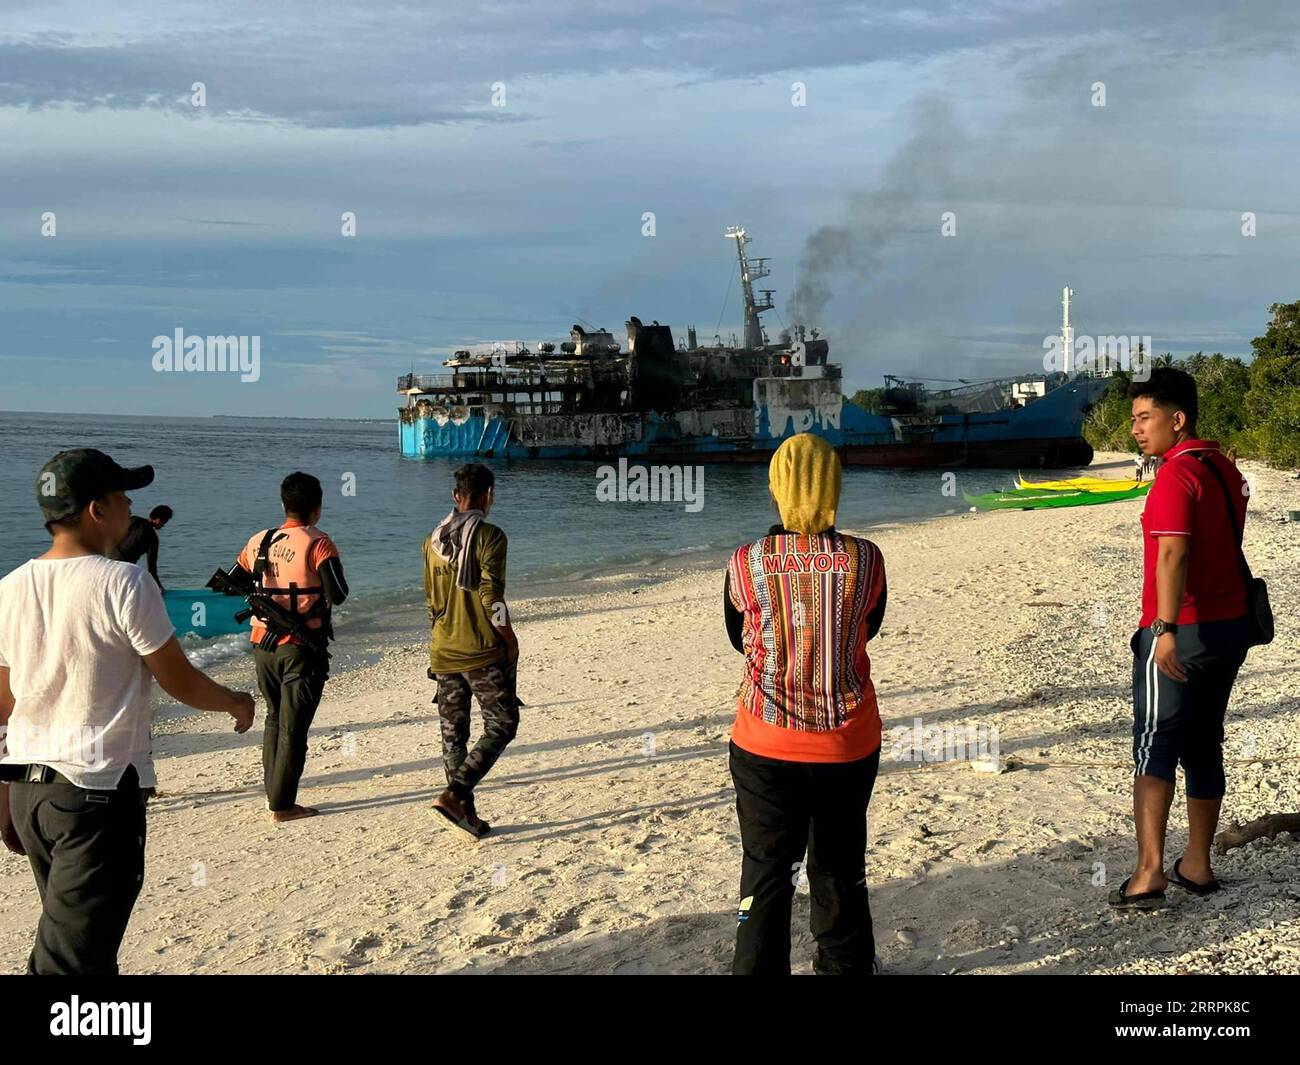 News Bilder des Tages 230330 -- BASILAN PROVINCE, March 30, 2023  -- The damaged M/V Lady Mary Joy 3 is seen along the coast of Basilan Province, the Philippines, March 30, 2023. A ferry carrying more than 200 people caught fire in the southern Philippines late Wednesday night, killing at least 10 passengers, the Philippine Coast Guard PCG said Thursday. Pilas Island Local Government/Handout via  THE PHILIPPINES-BASILAN PROVINCE-FERRY FIRE Xinhua PUBLICATIONxNOTxINxCHN Stock Photo